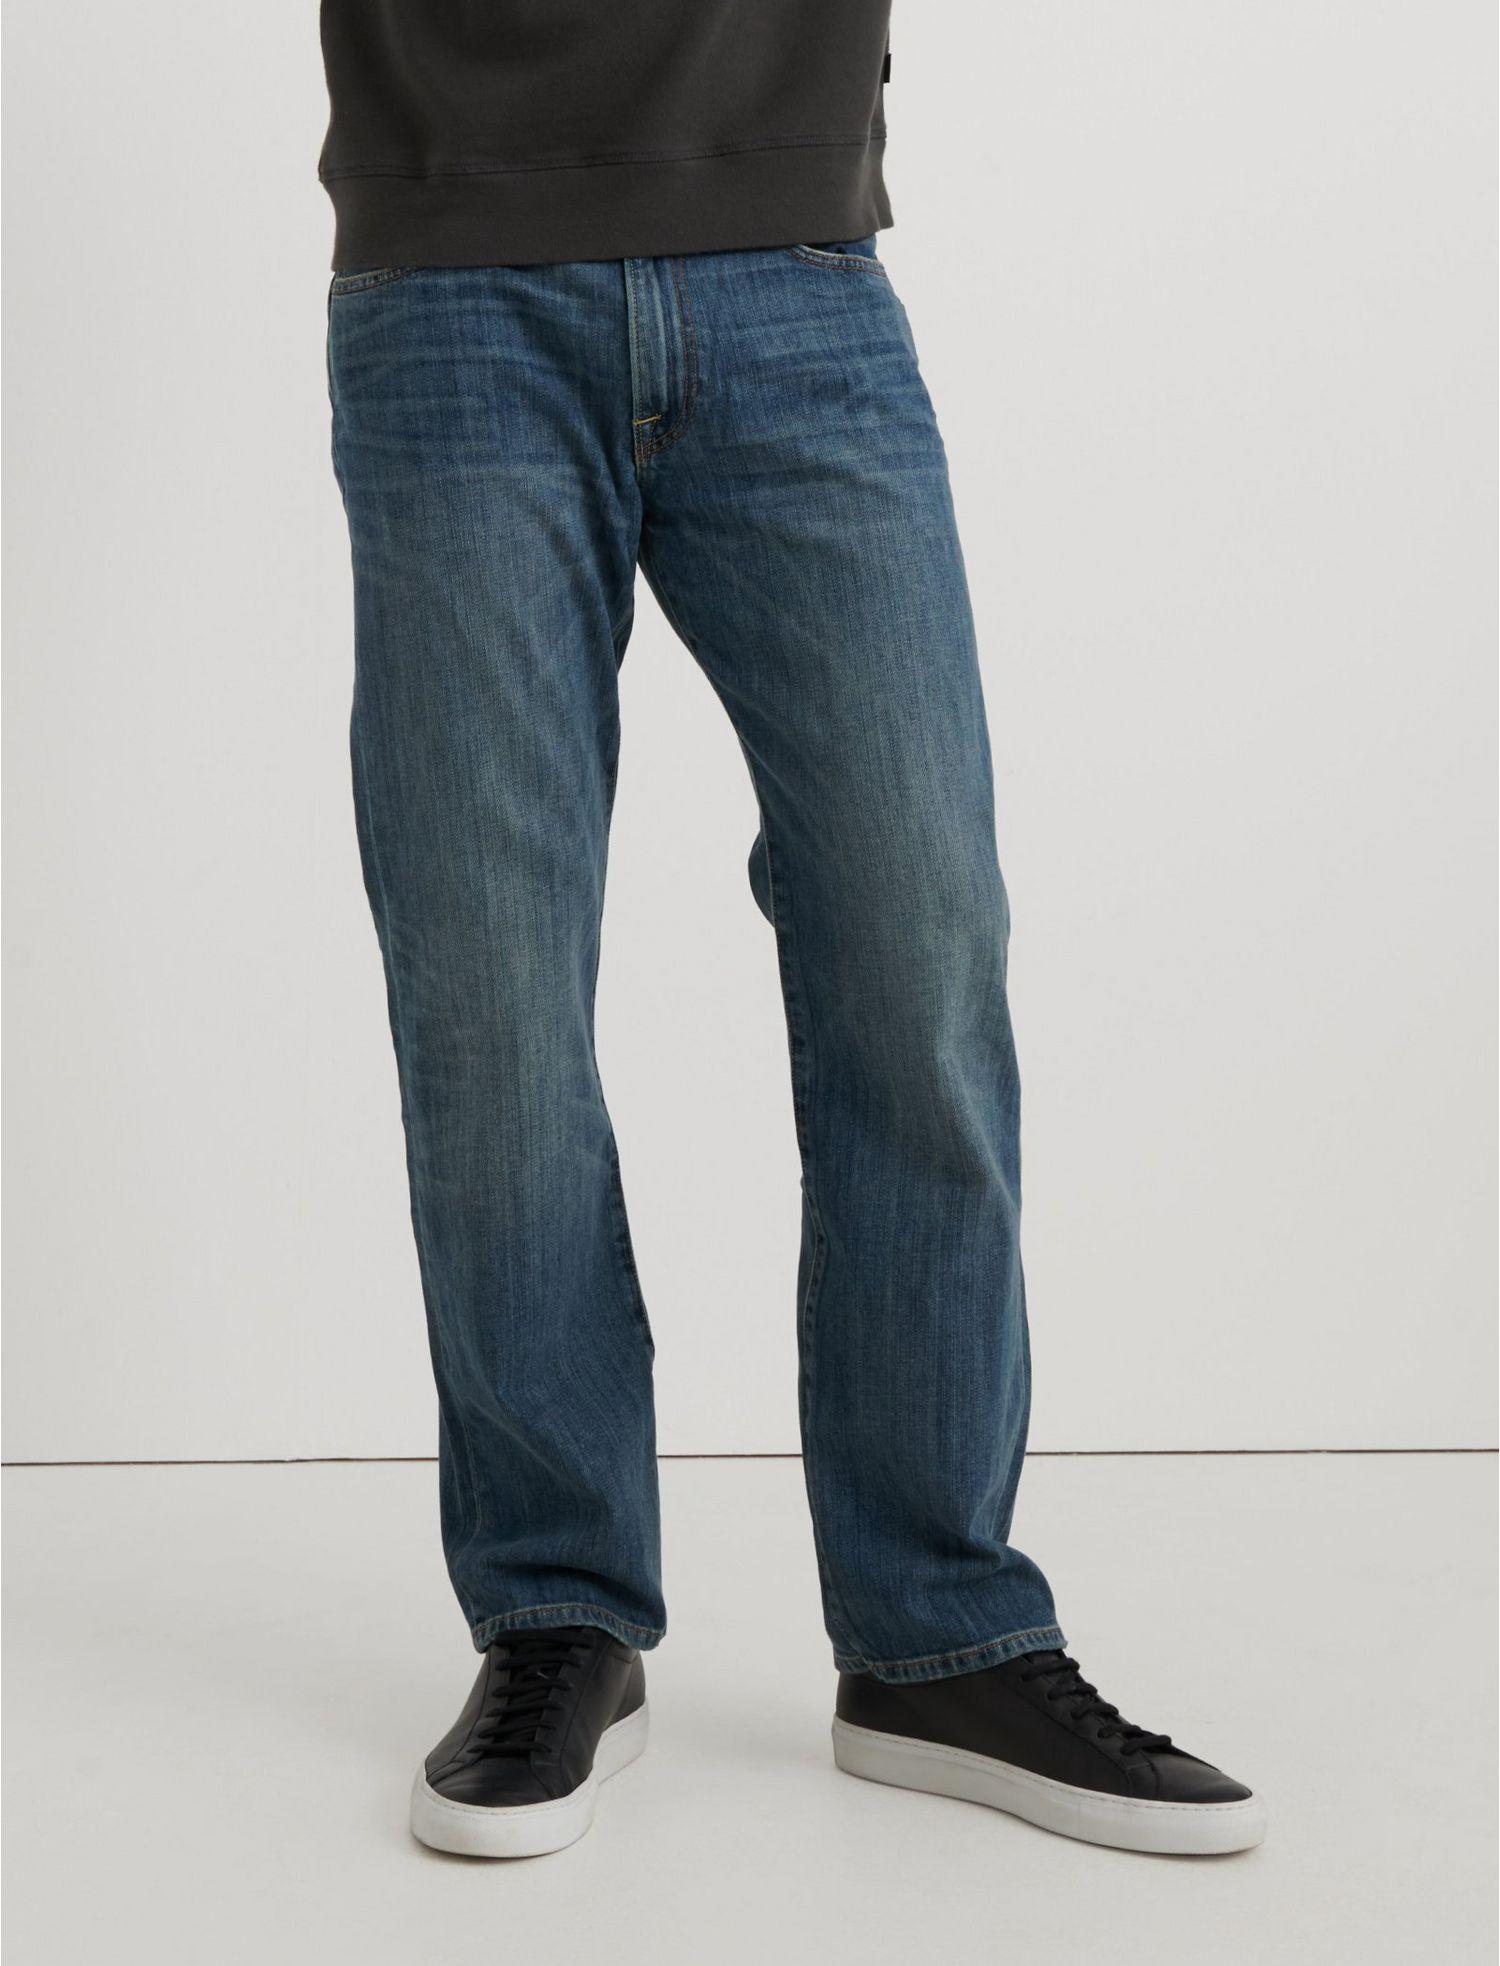 Lucky Brand Synthetic 363 Vintage Straight Jean in Blue for Men - Lyst